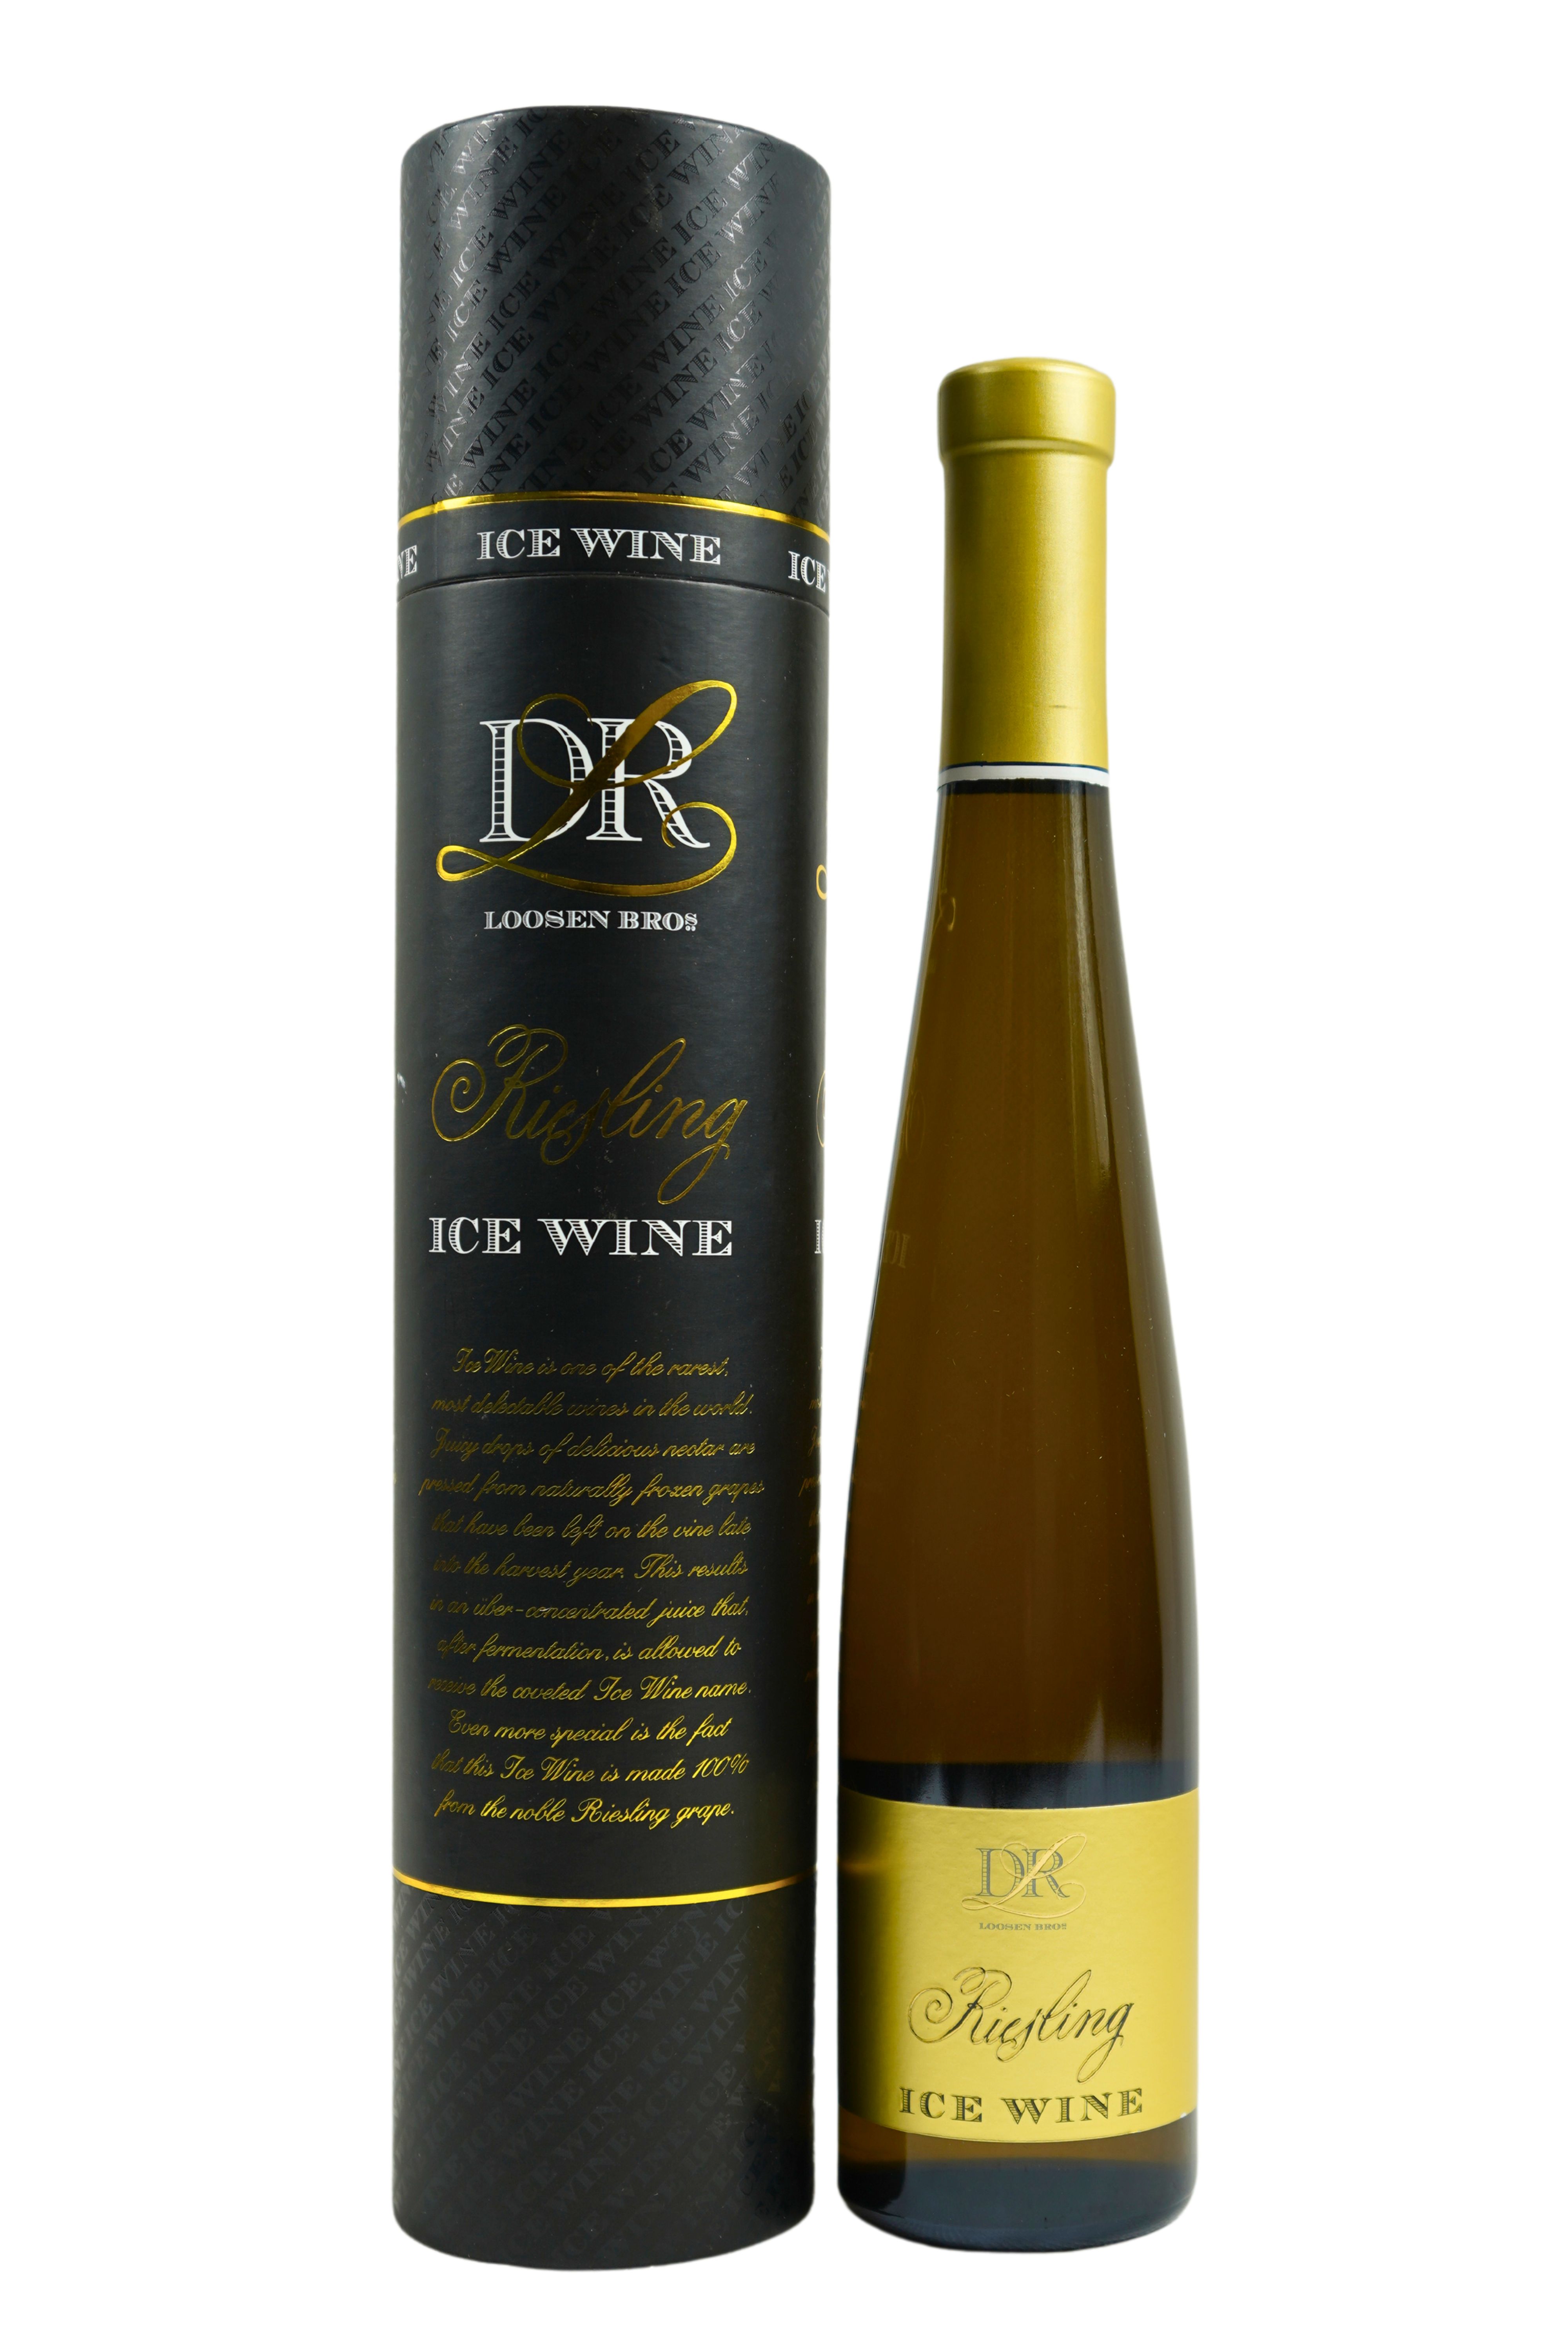 2019 Riesling Ice Wine Dr. L